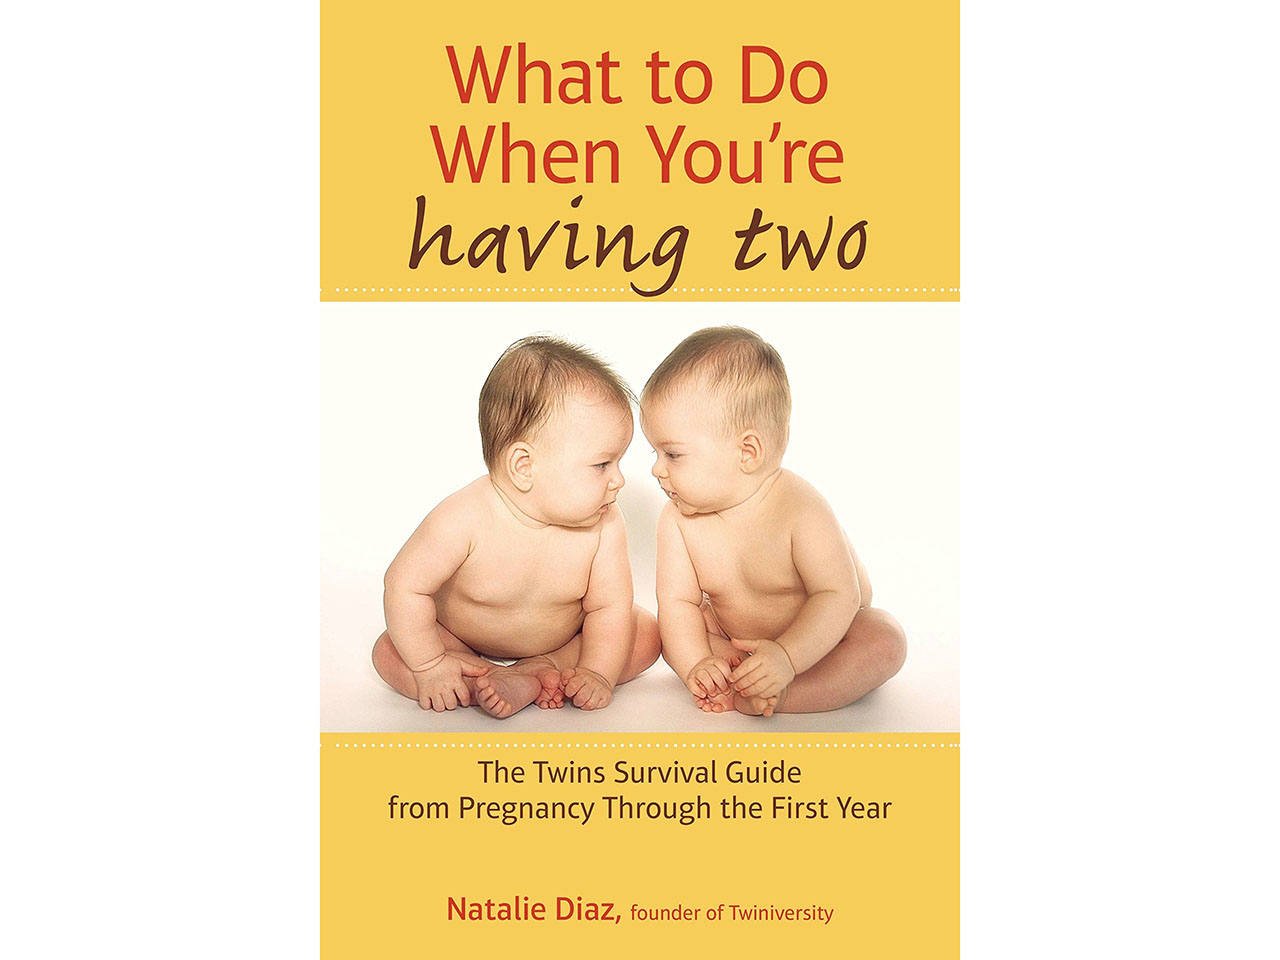 Cover of the pregnancy book What to do when you're having two